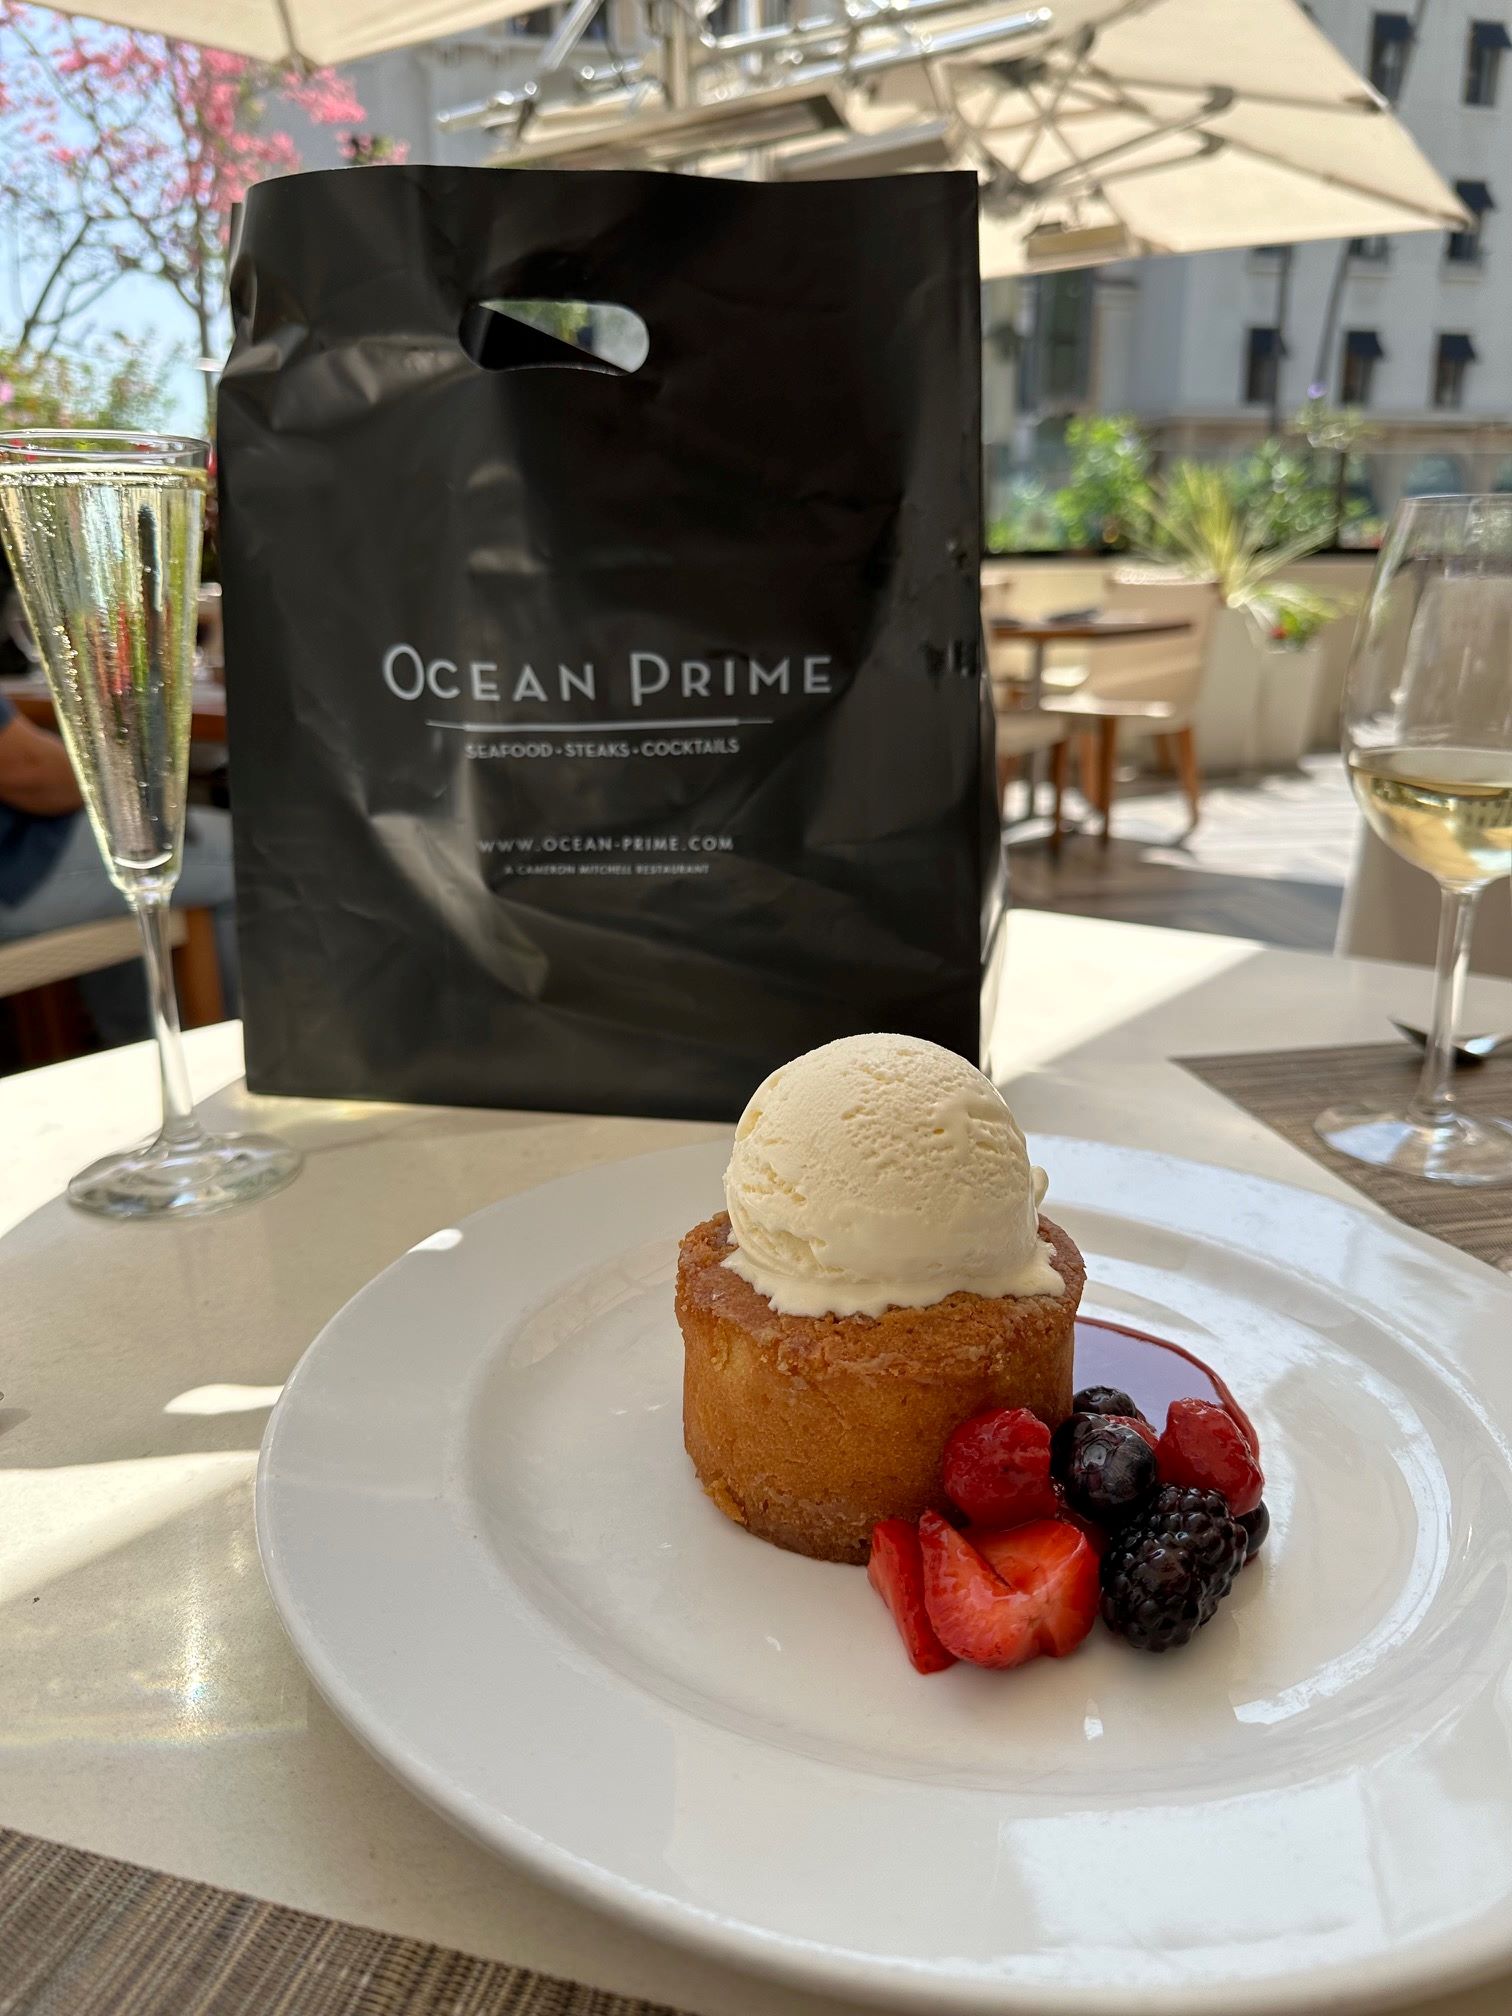 An image of Ocean Prime's Warm Butter Cake.